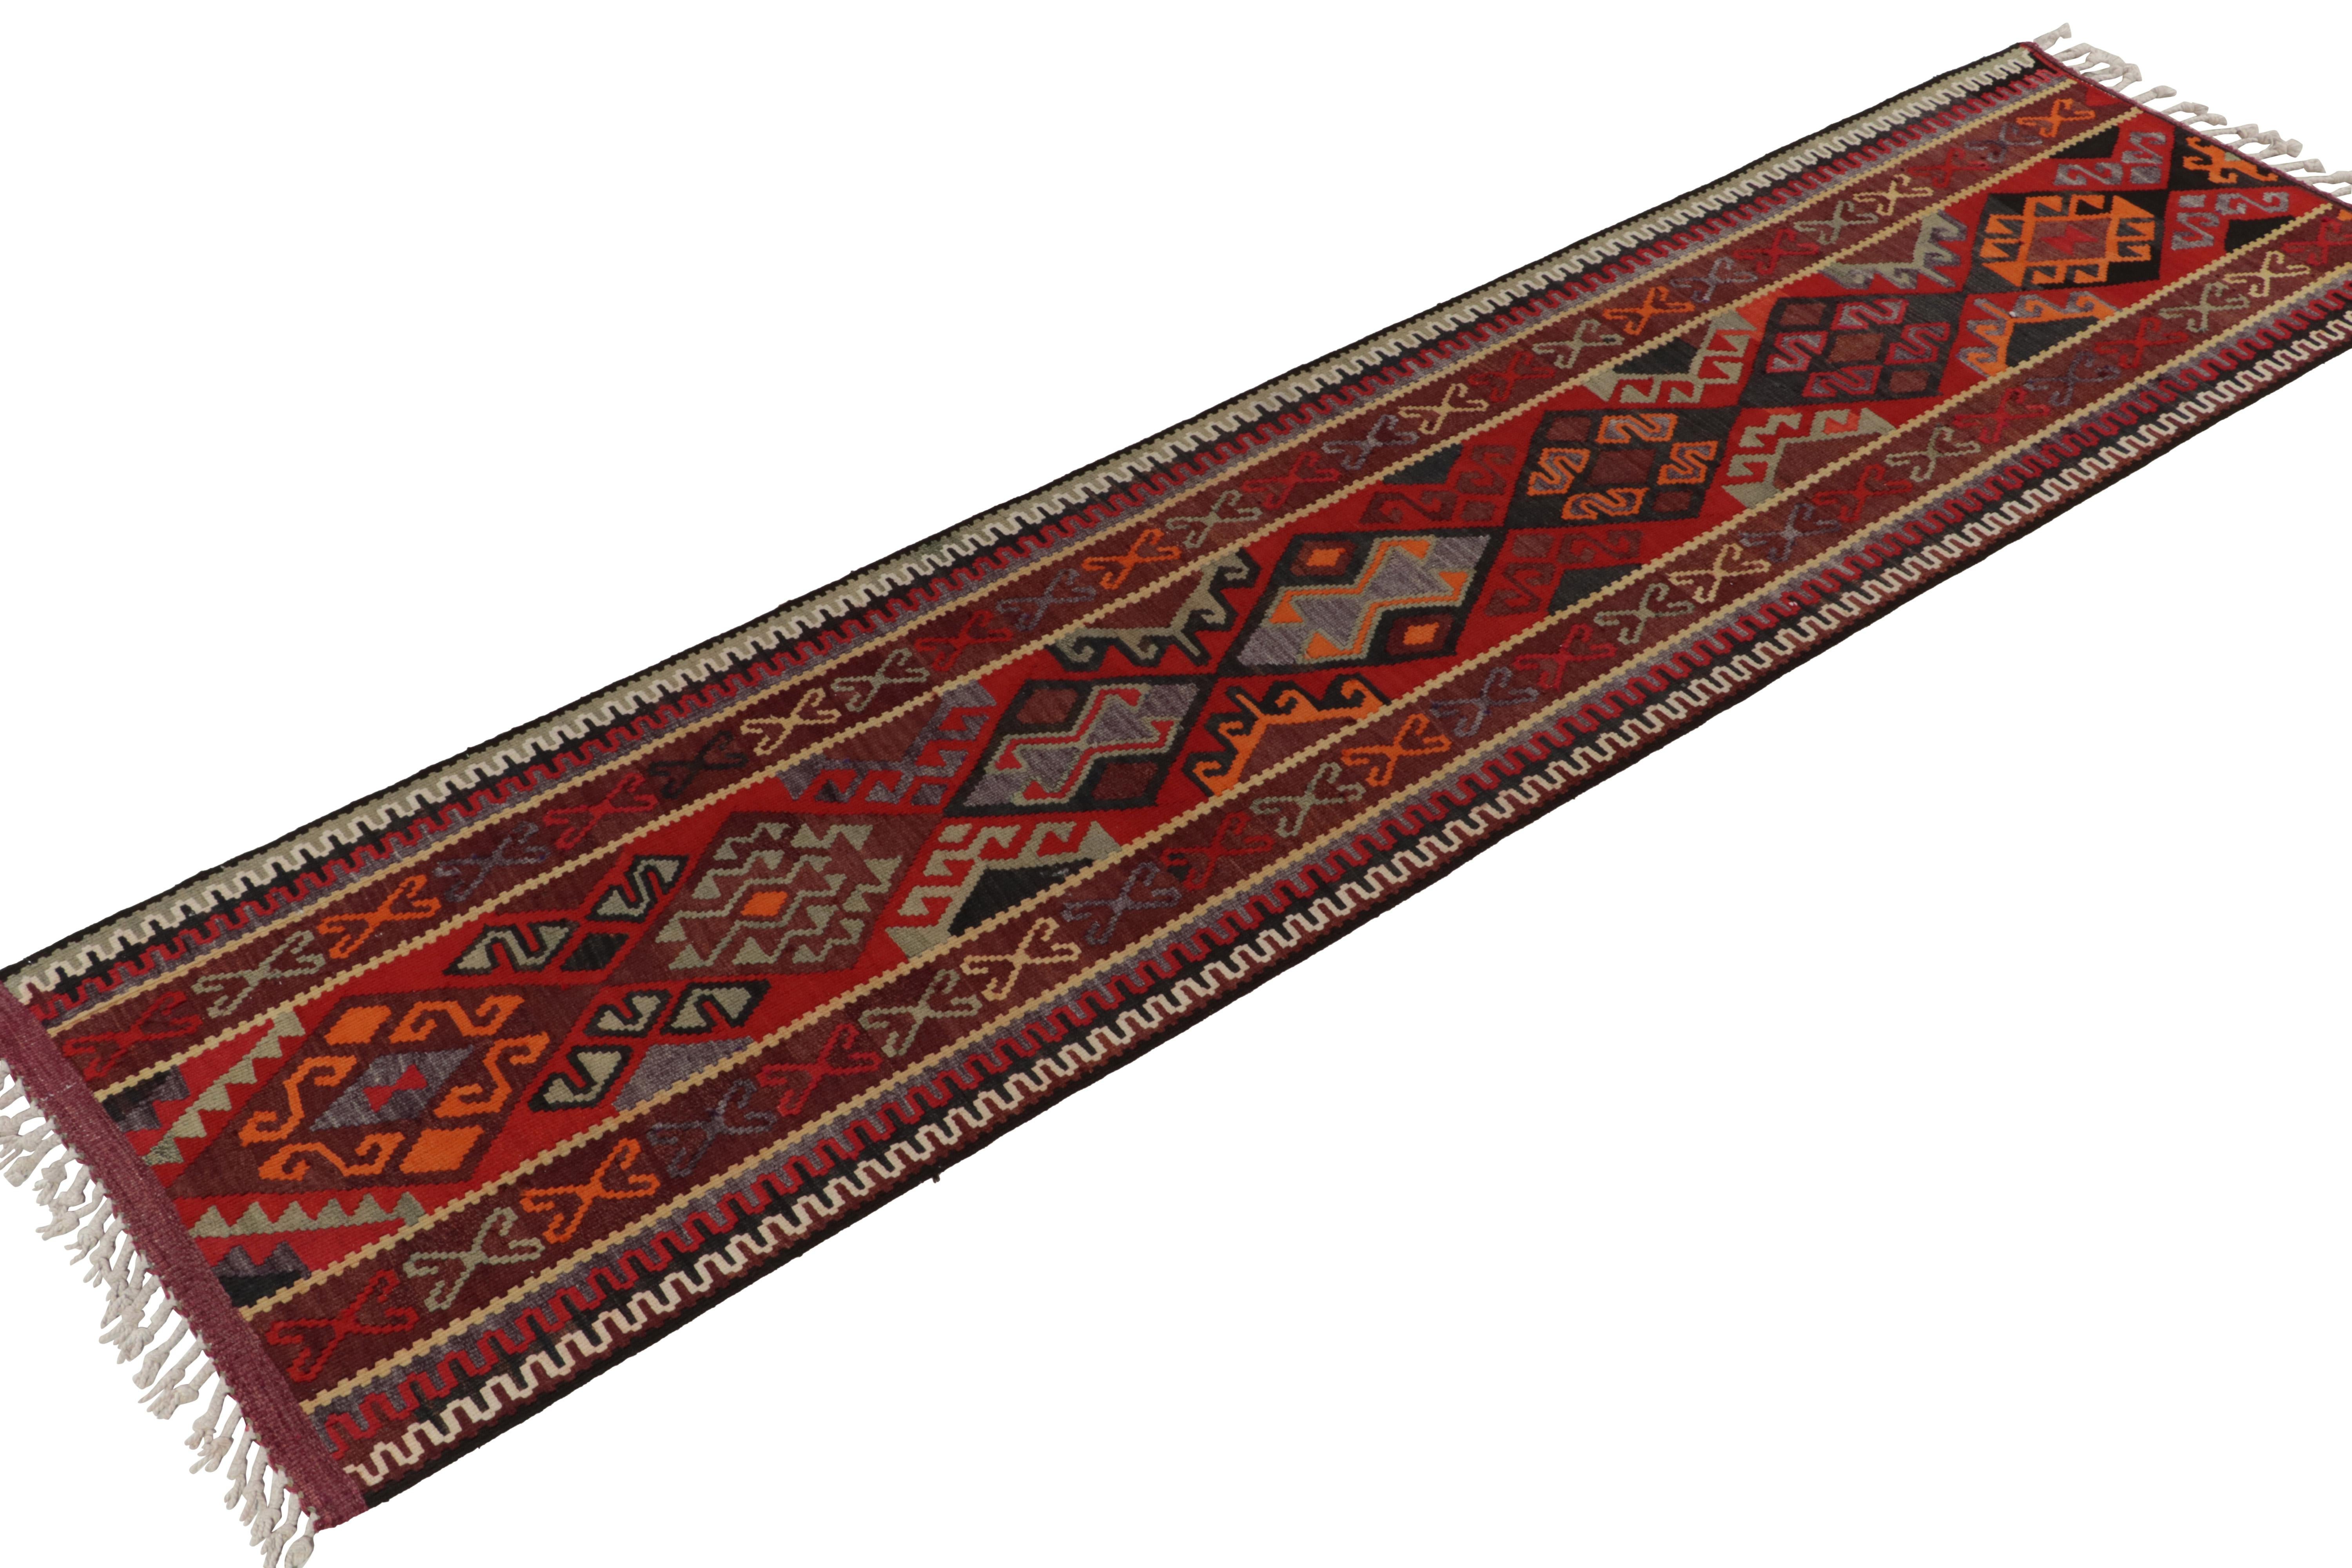 From Rug & Kilim Principal Josh Nazmiyal’s latest acquisitions, a vibrant 3x13 vintage kilim runner originating from Turkey circa 1950-1960. 

On the Design: The geometric medallion pattern with latch hook extensions enjoys a scintillating